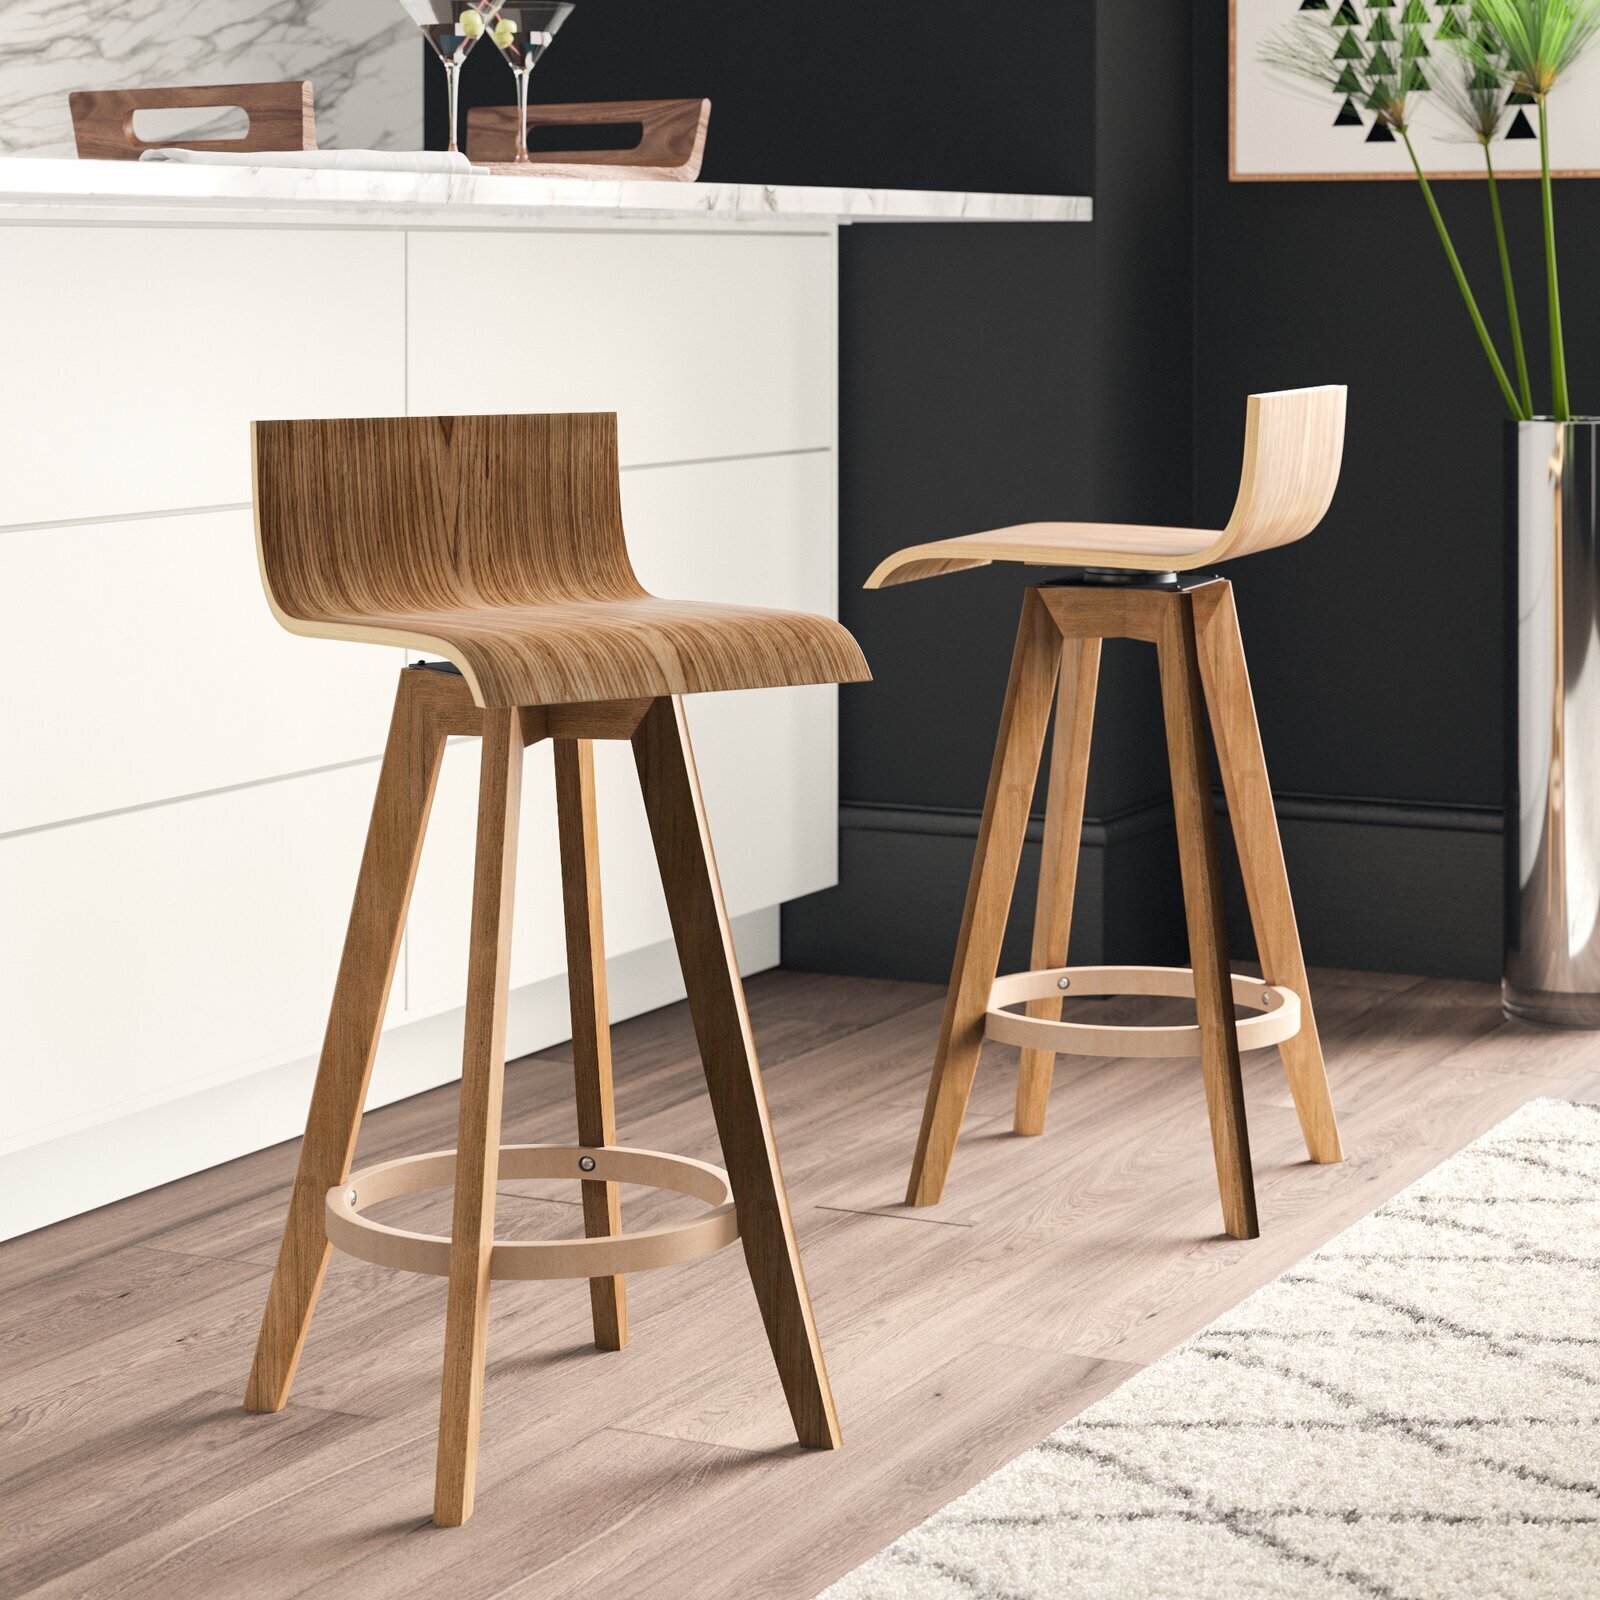 Wooden Bar Stools With Low Backs